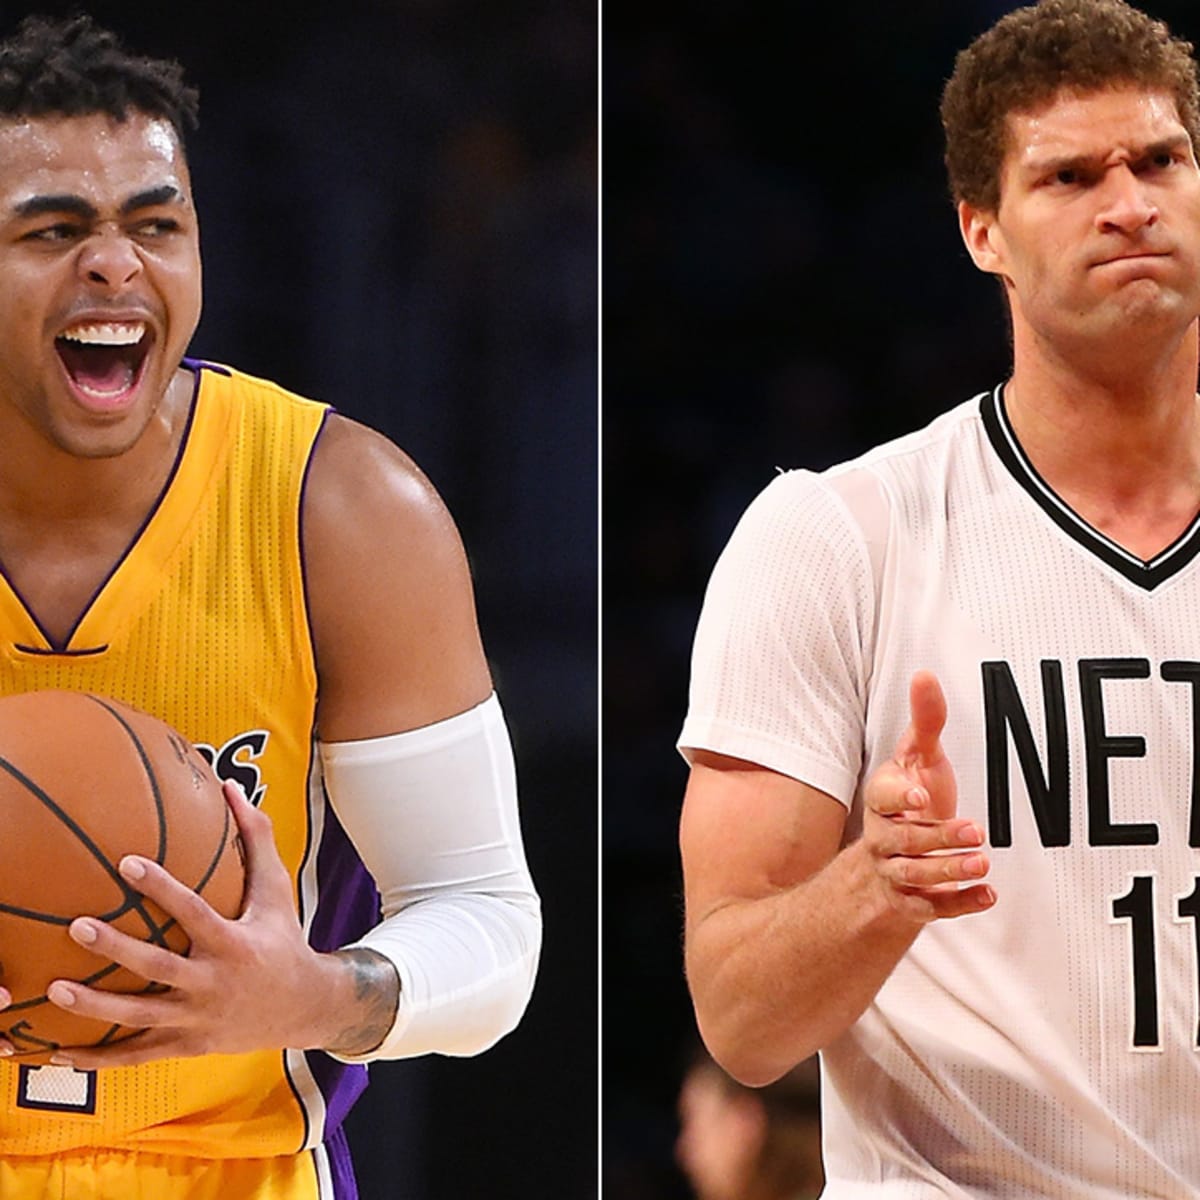 D'Angelo Russell was becoming a Lakers afterthought. Now the Nets are his  team 